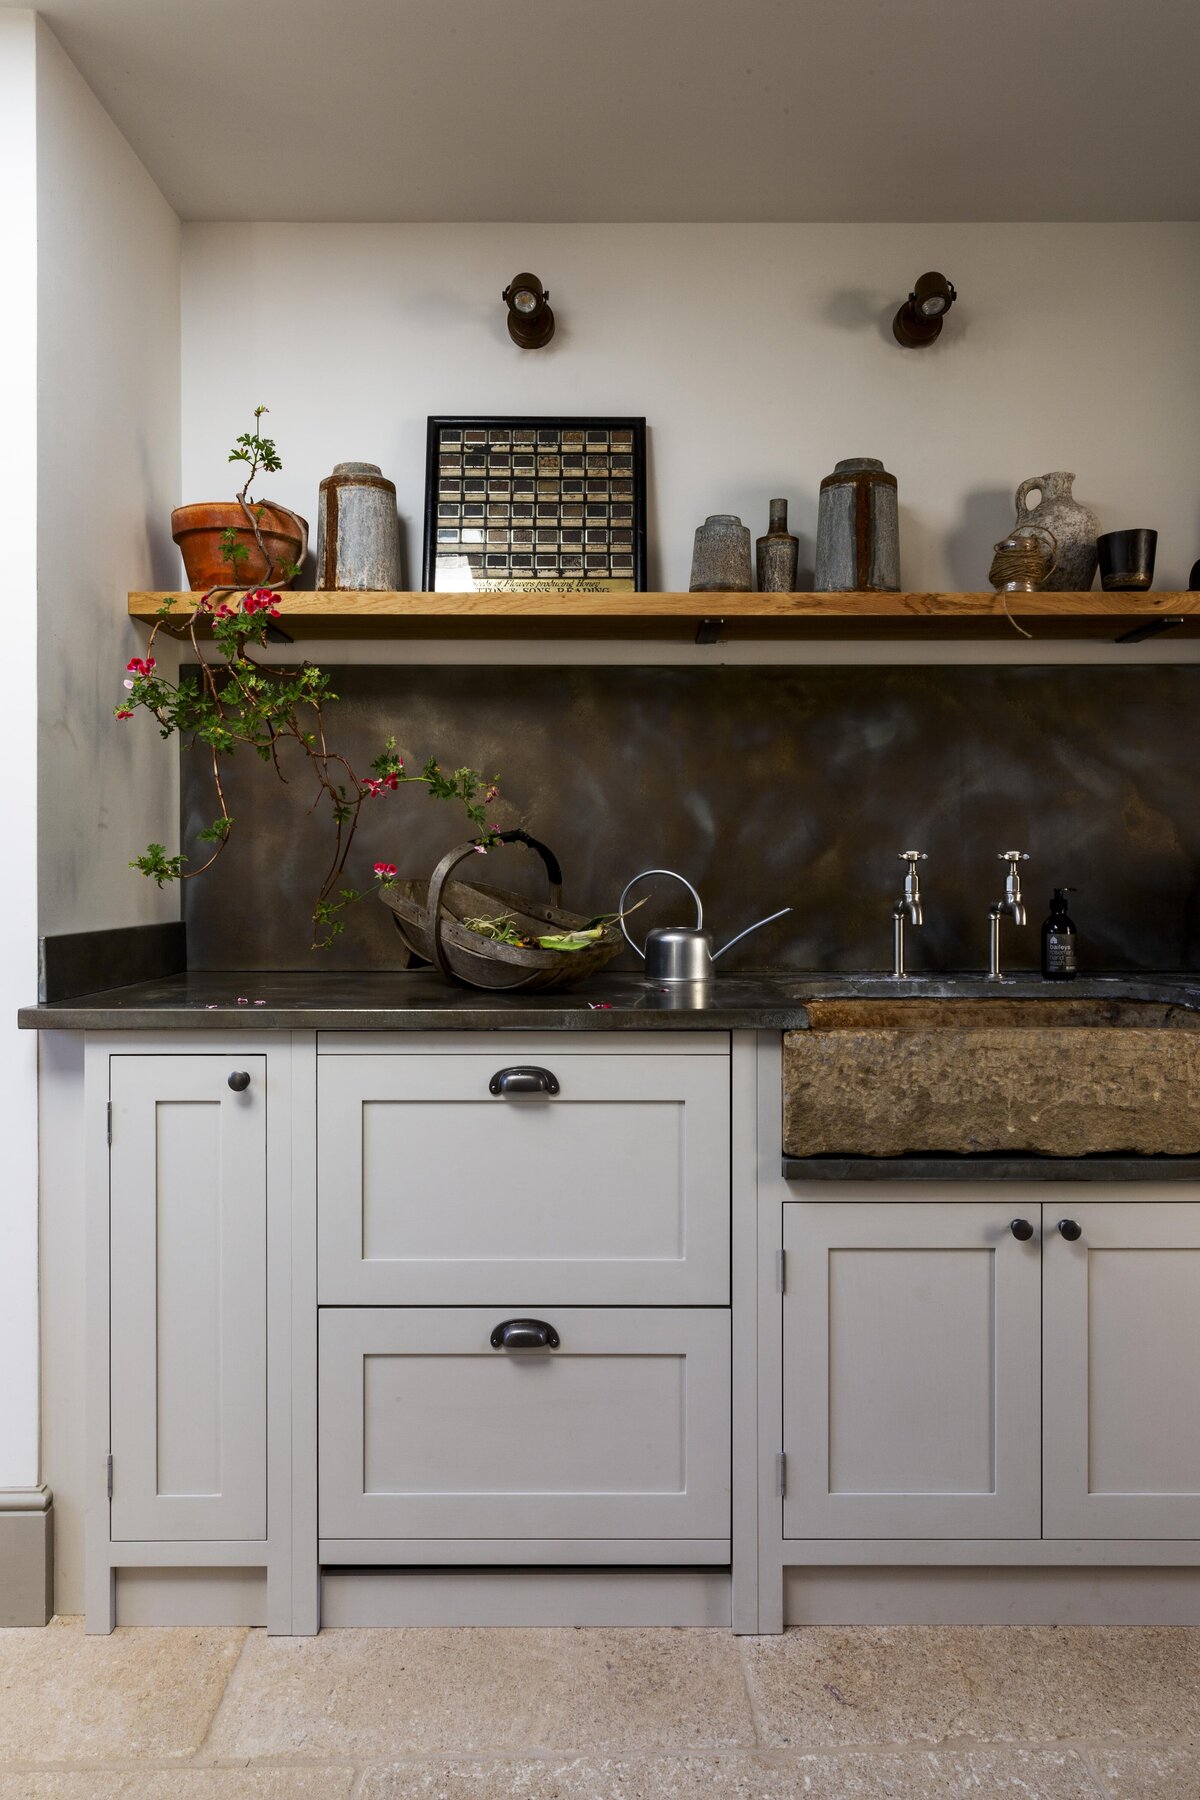 Grey cabinets with dark metal splashback and flower vase on the counter